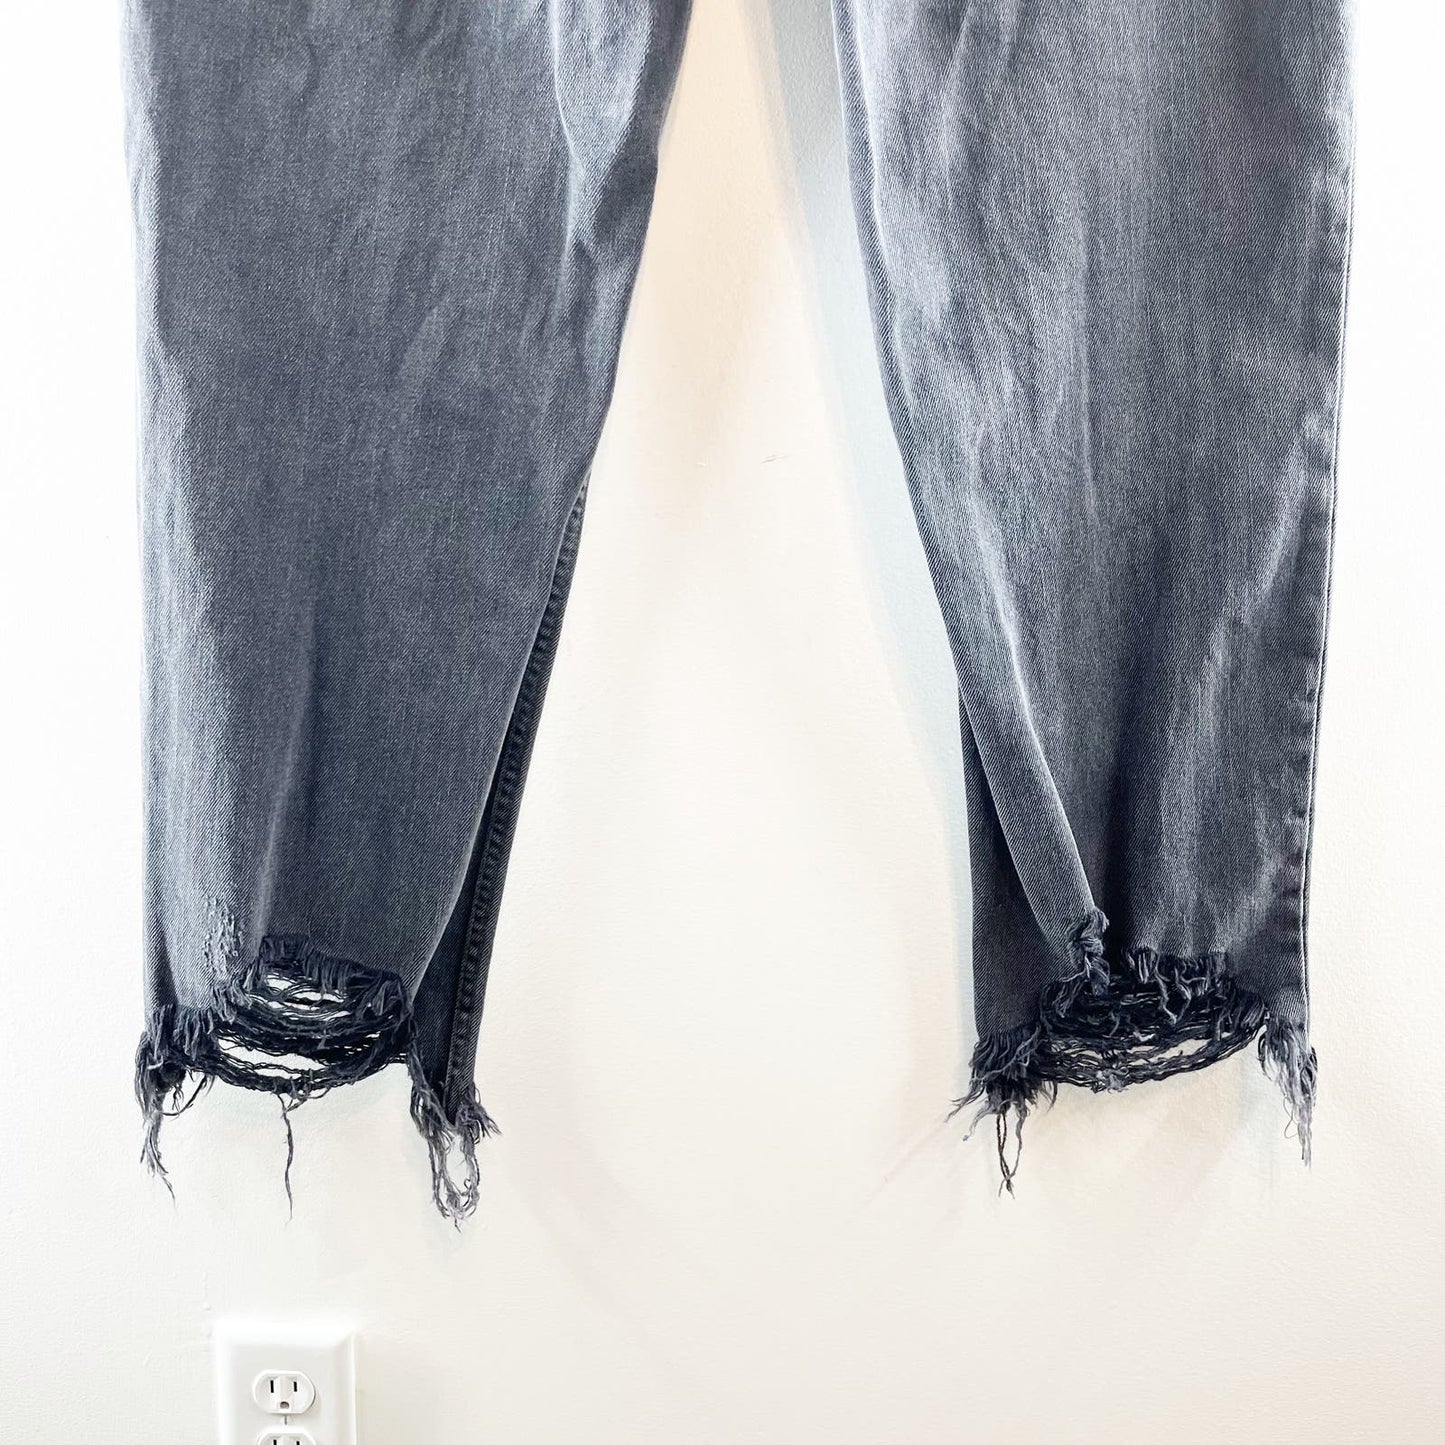 Free People We The Free Chewed Up Midrise Straight Jeans Black 31 / 12